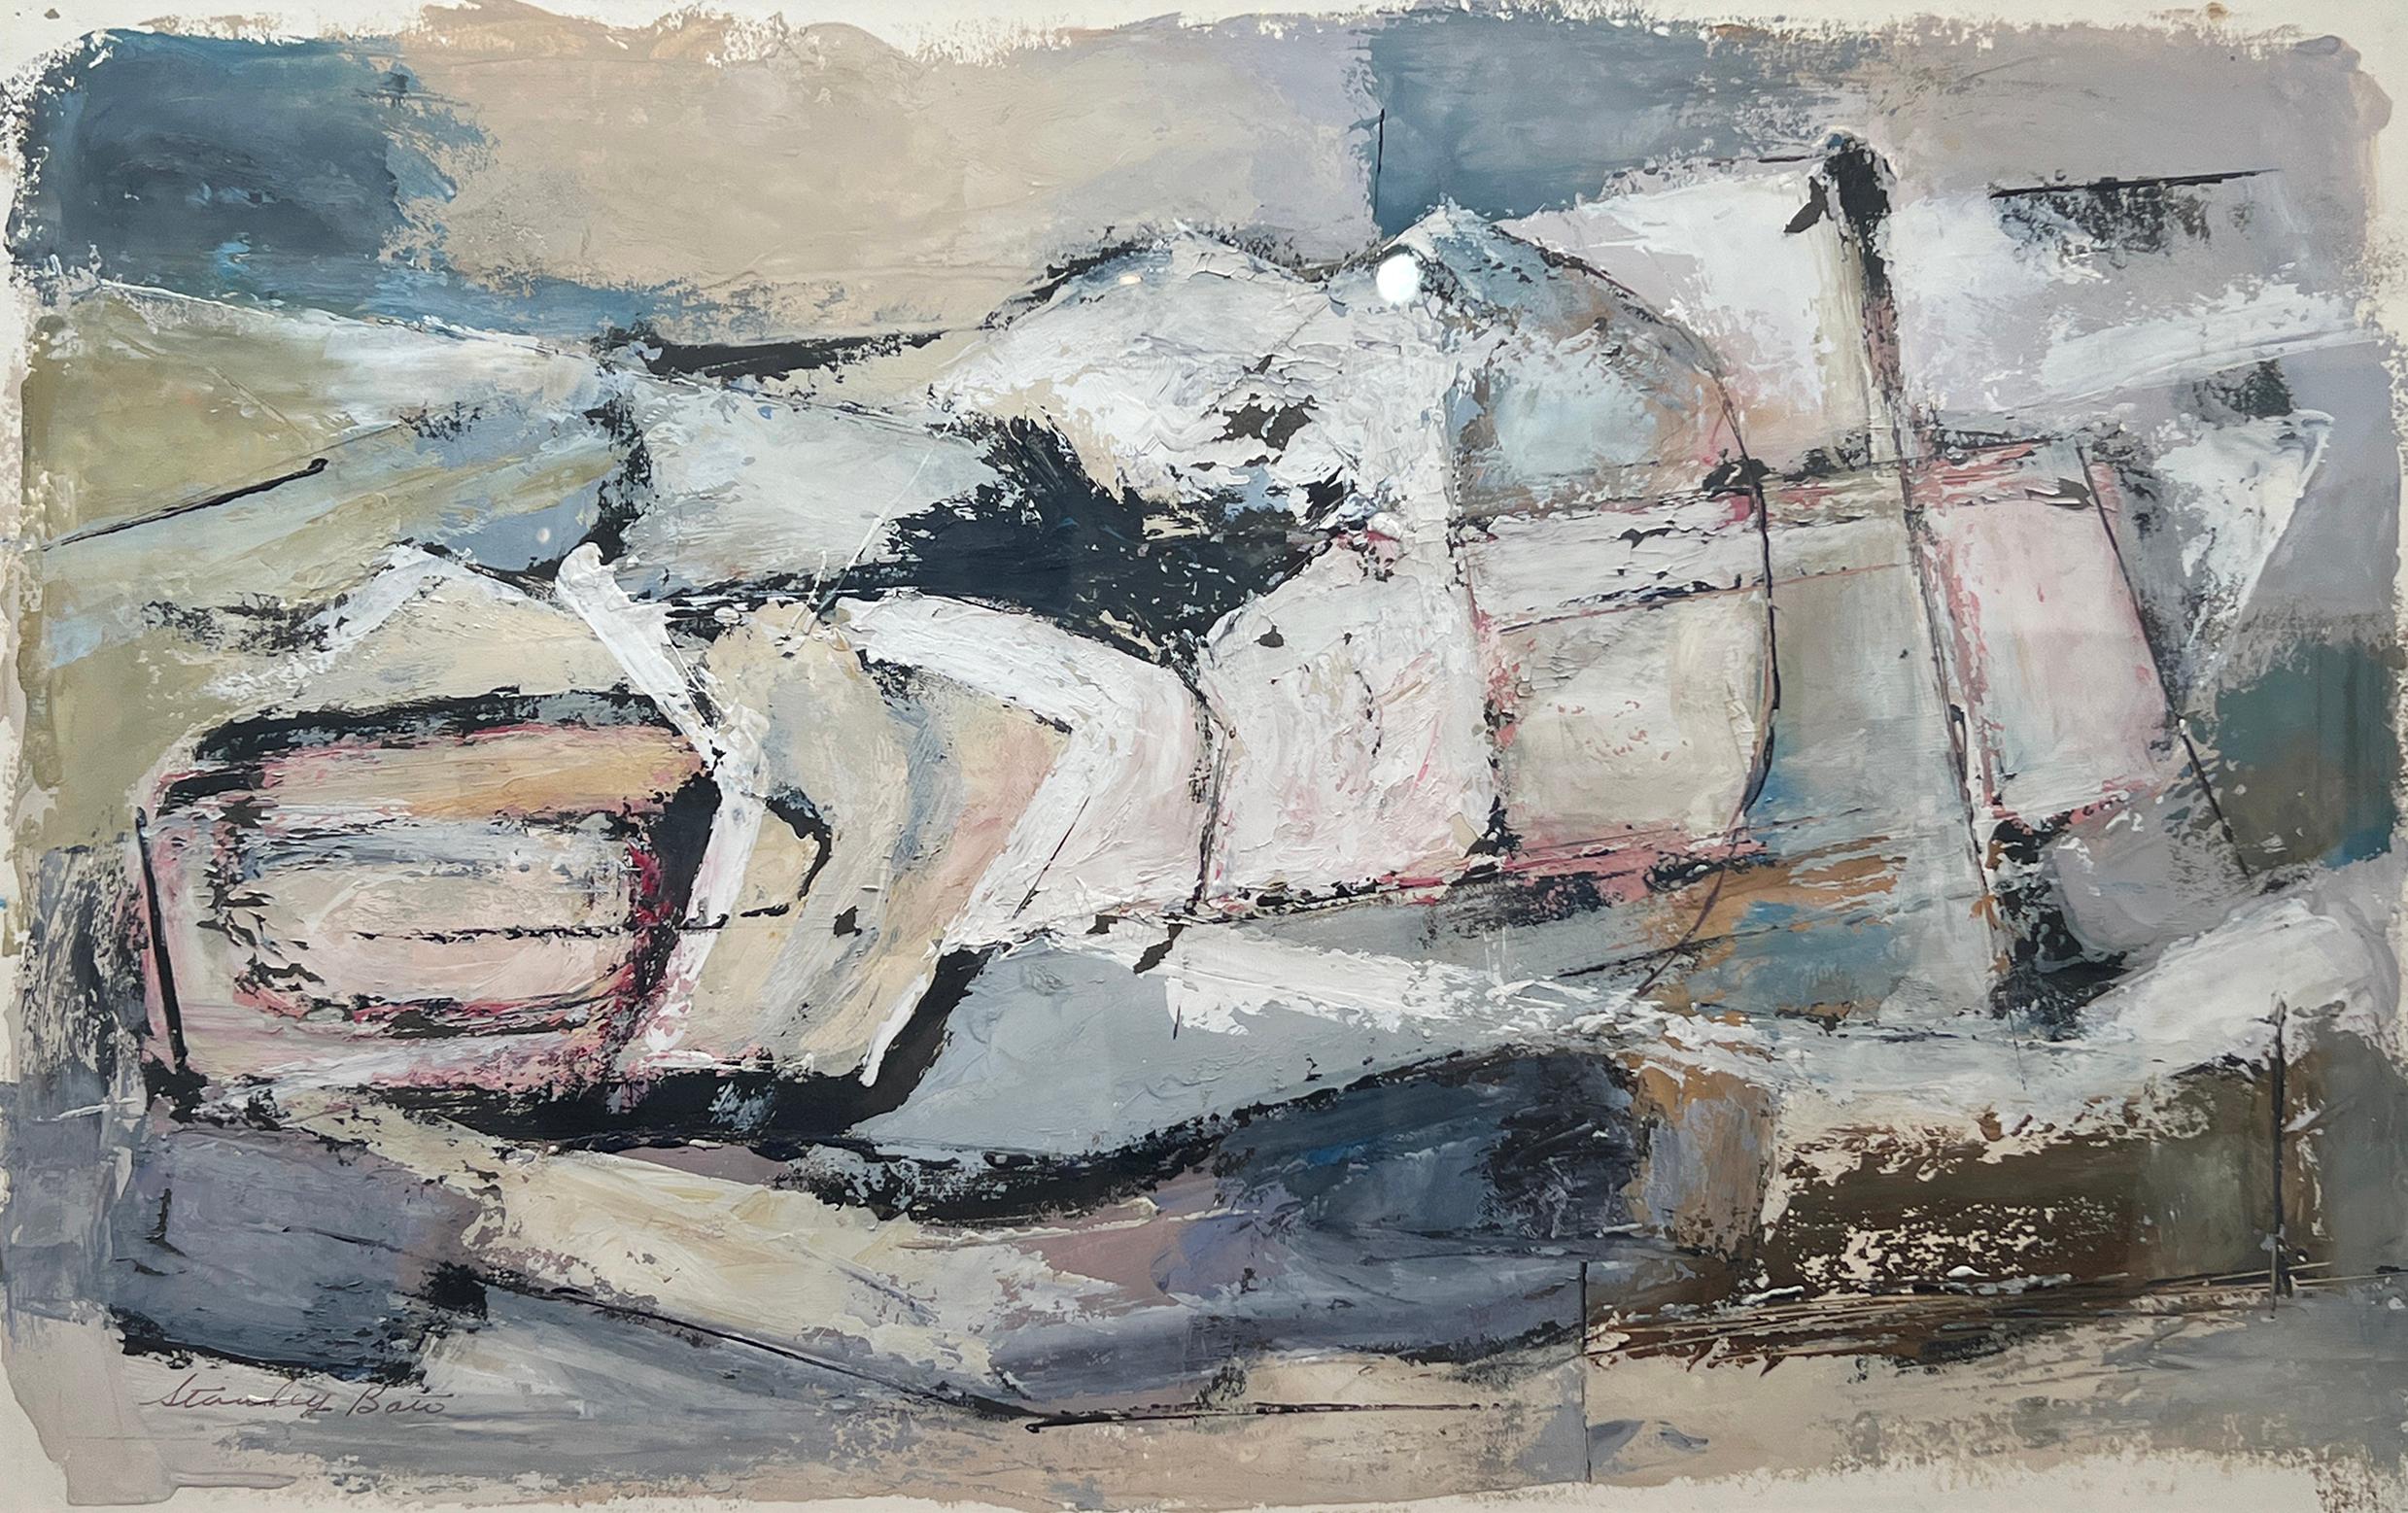 This Modern Abstract Expressionist painting by Stanley Bate is made with gouache on paper and features a cool, muted palette and light texture. The painting itself is 13